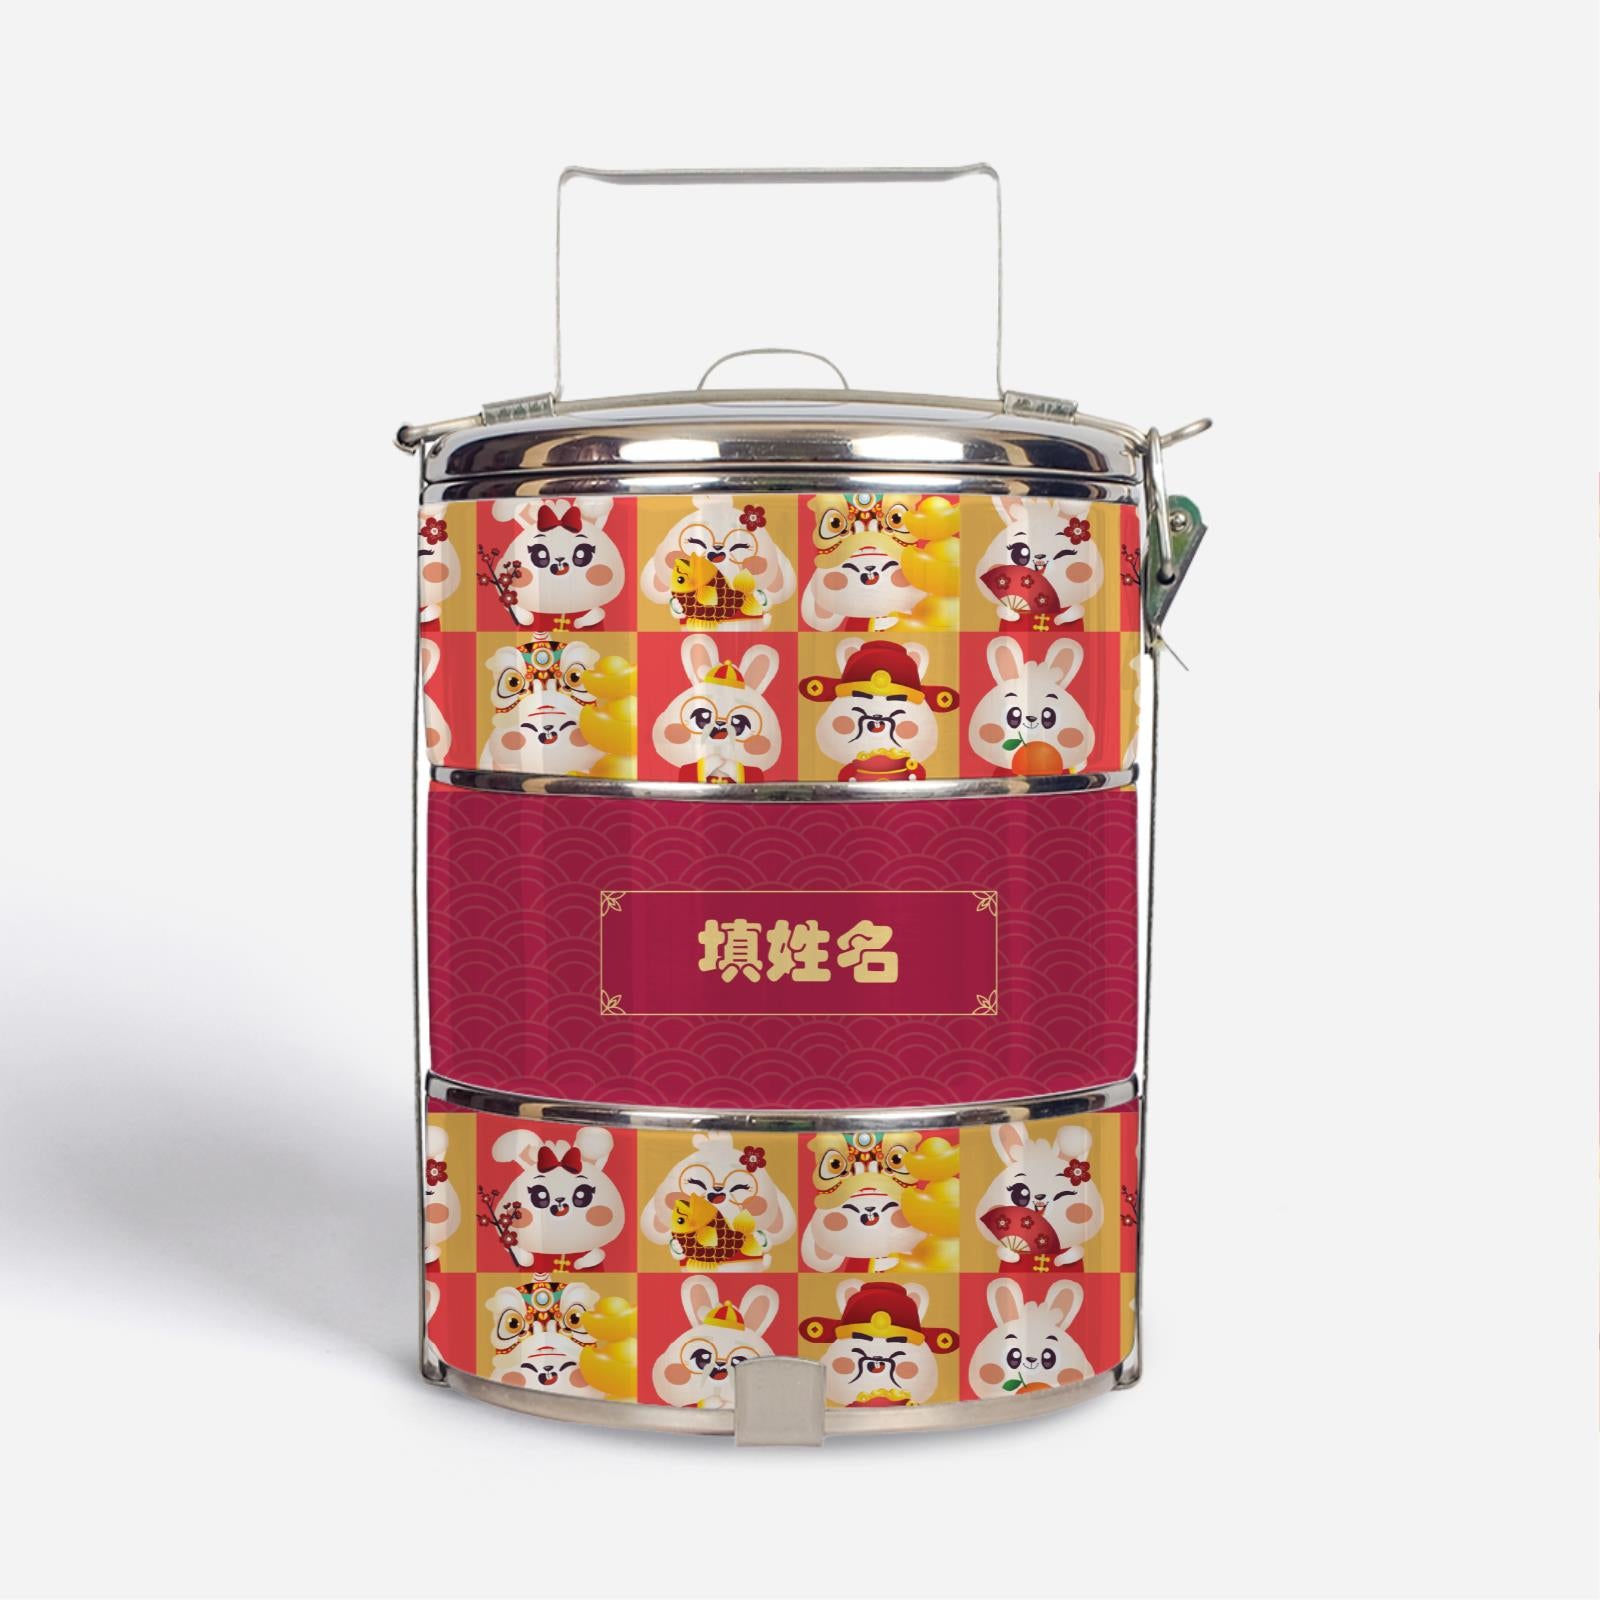 Cny Rabbit Family - Rabbit Family Red Standard Tififn Carrier With Chinese Personalization